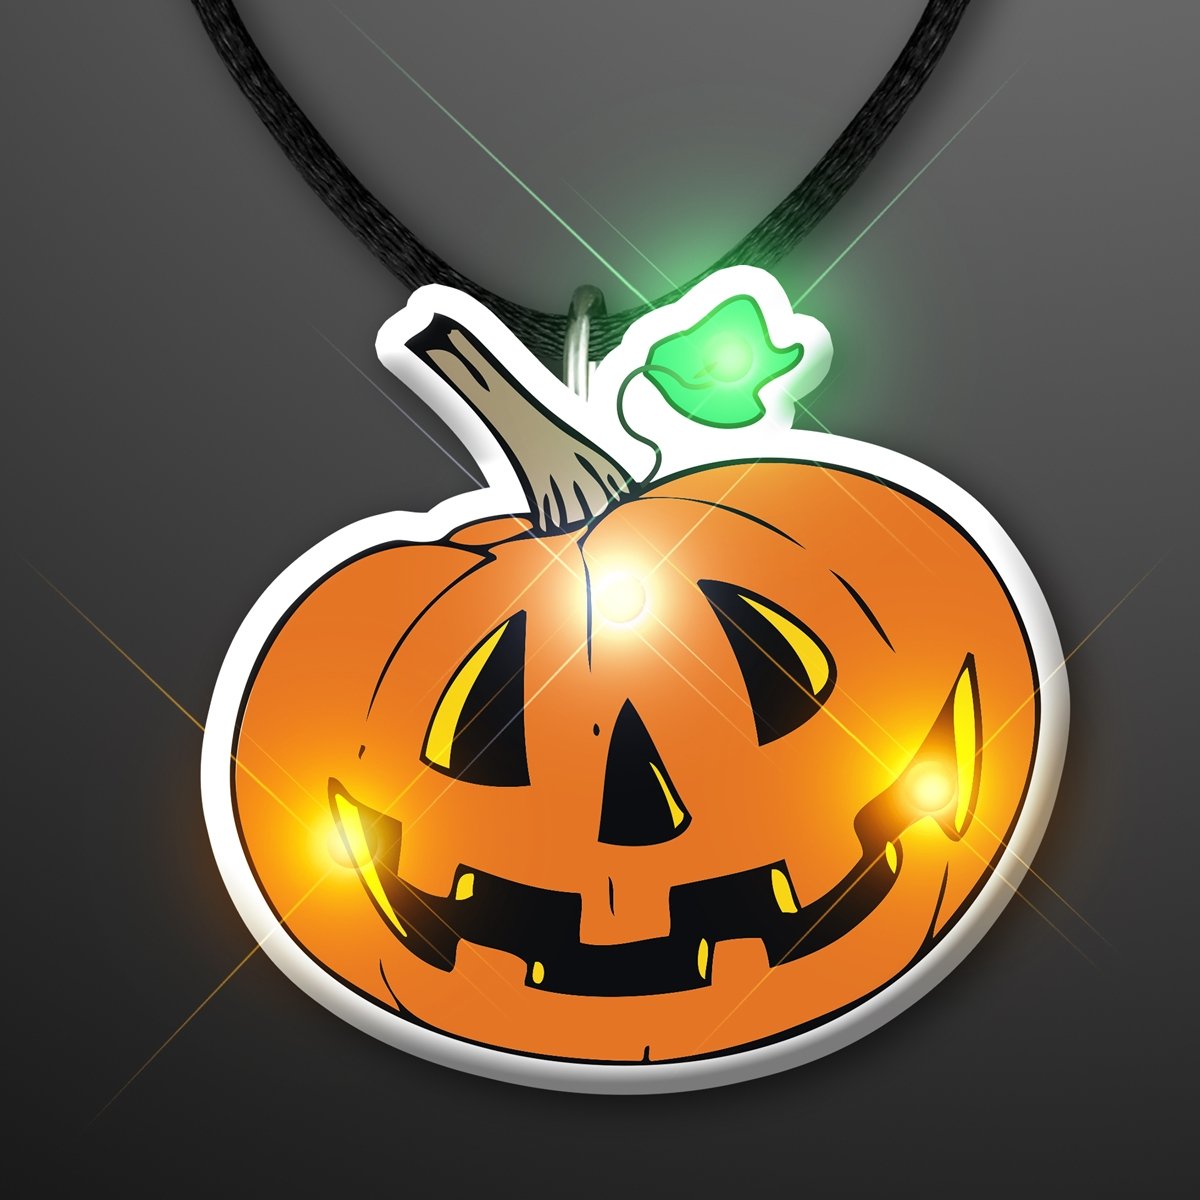 40 Pieces Halloween LED Necklace and Ring LED Party Favors Set Halloween Flash Ring Supplies Light up Flash Party Accessories 